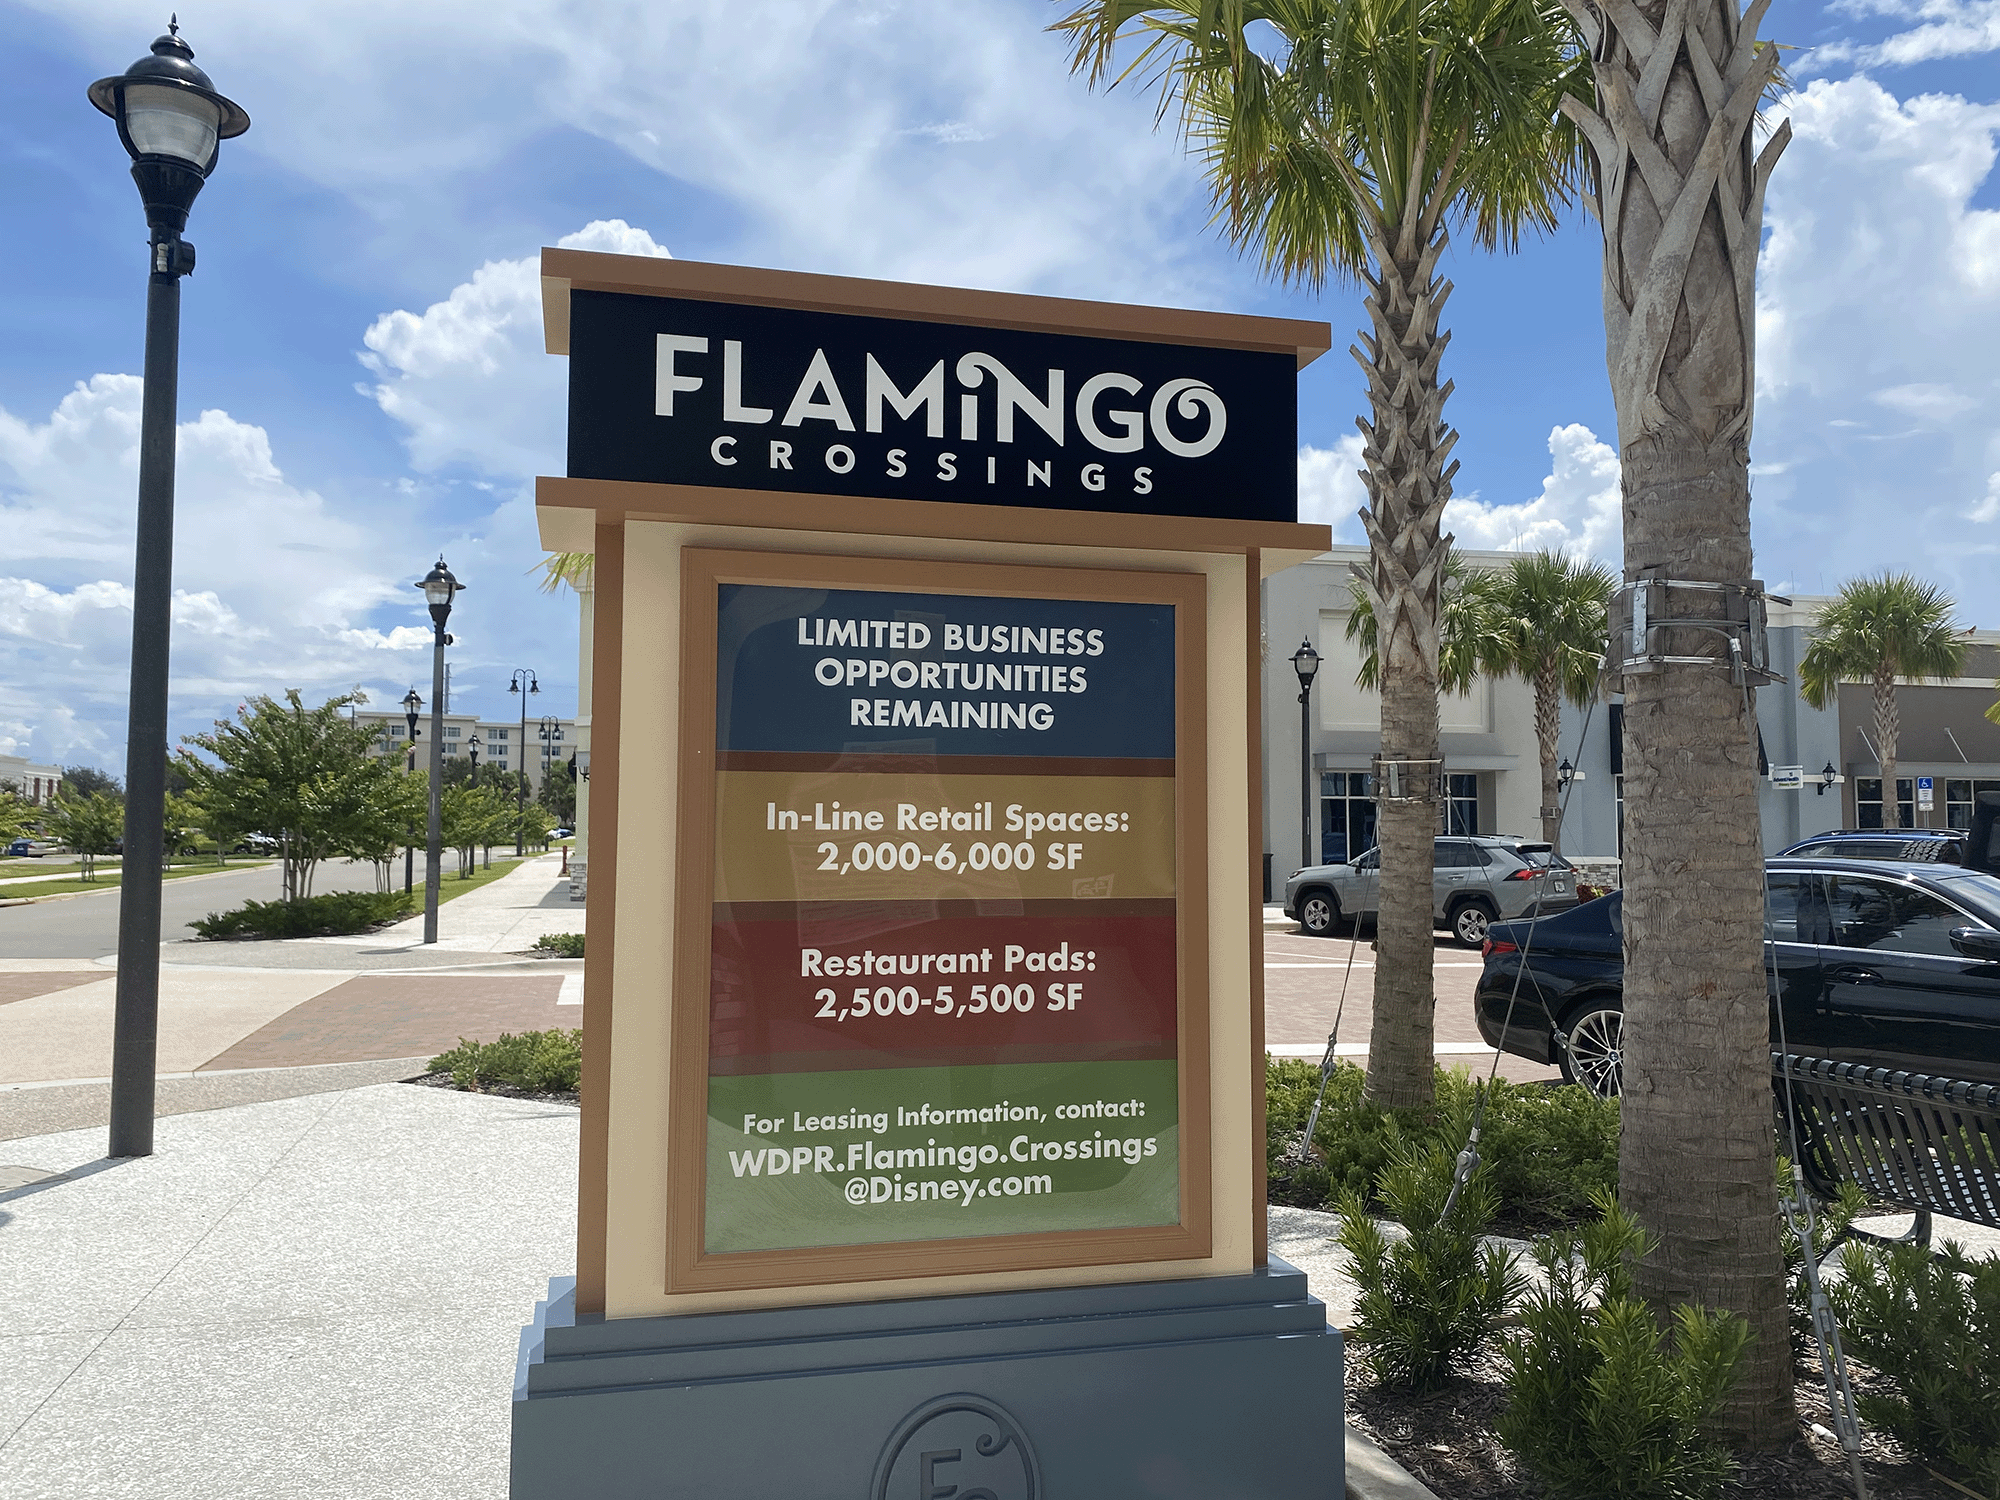 flamingo crossings sign outside with palm trees and sidewalk